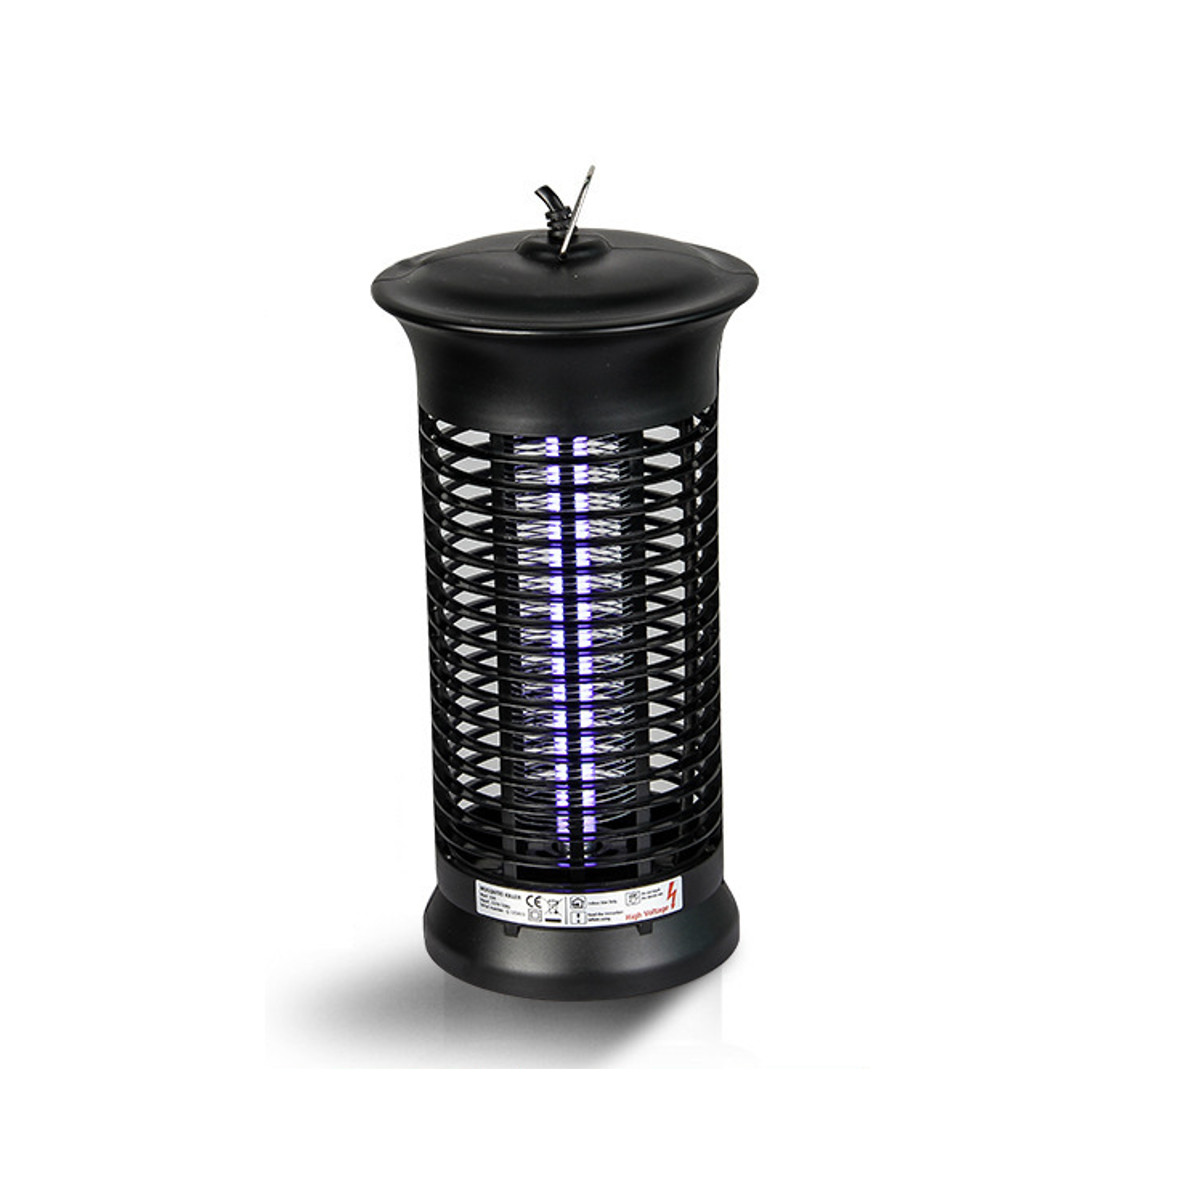 

110v/220v 6W Electic Mosquito Killer Lamp Photocatalyst Mosquito Dispeller Insect Fly Bug Zapper Trap Pest Light